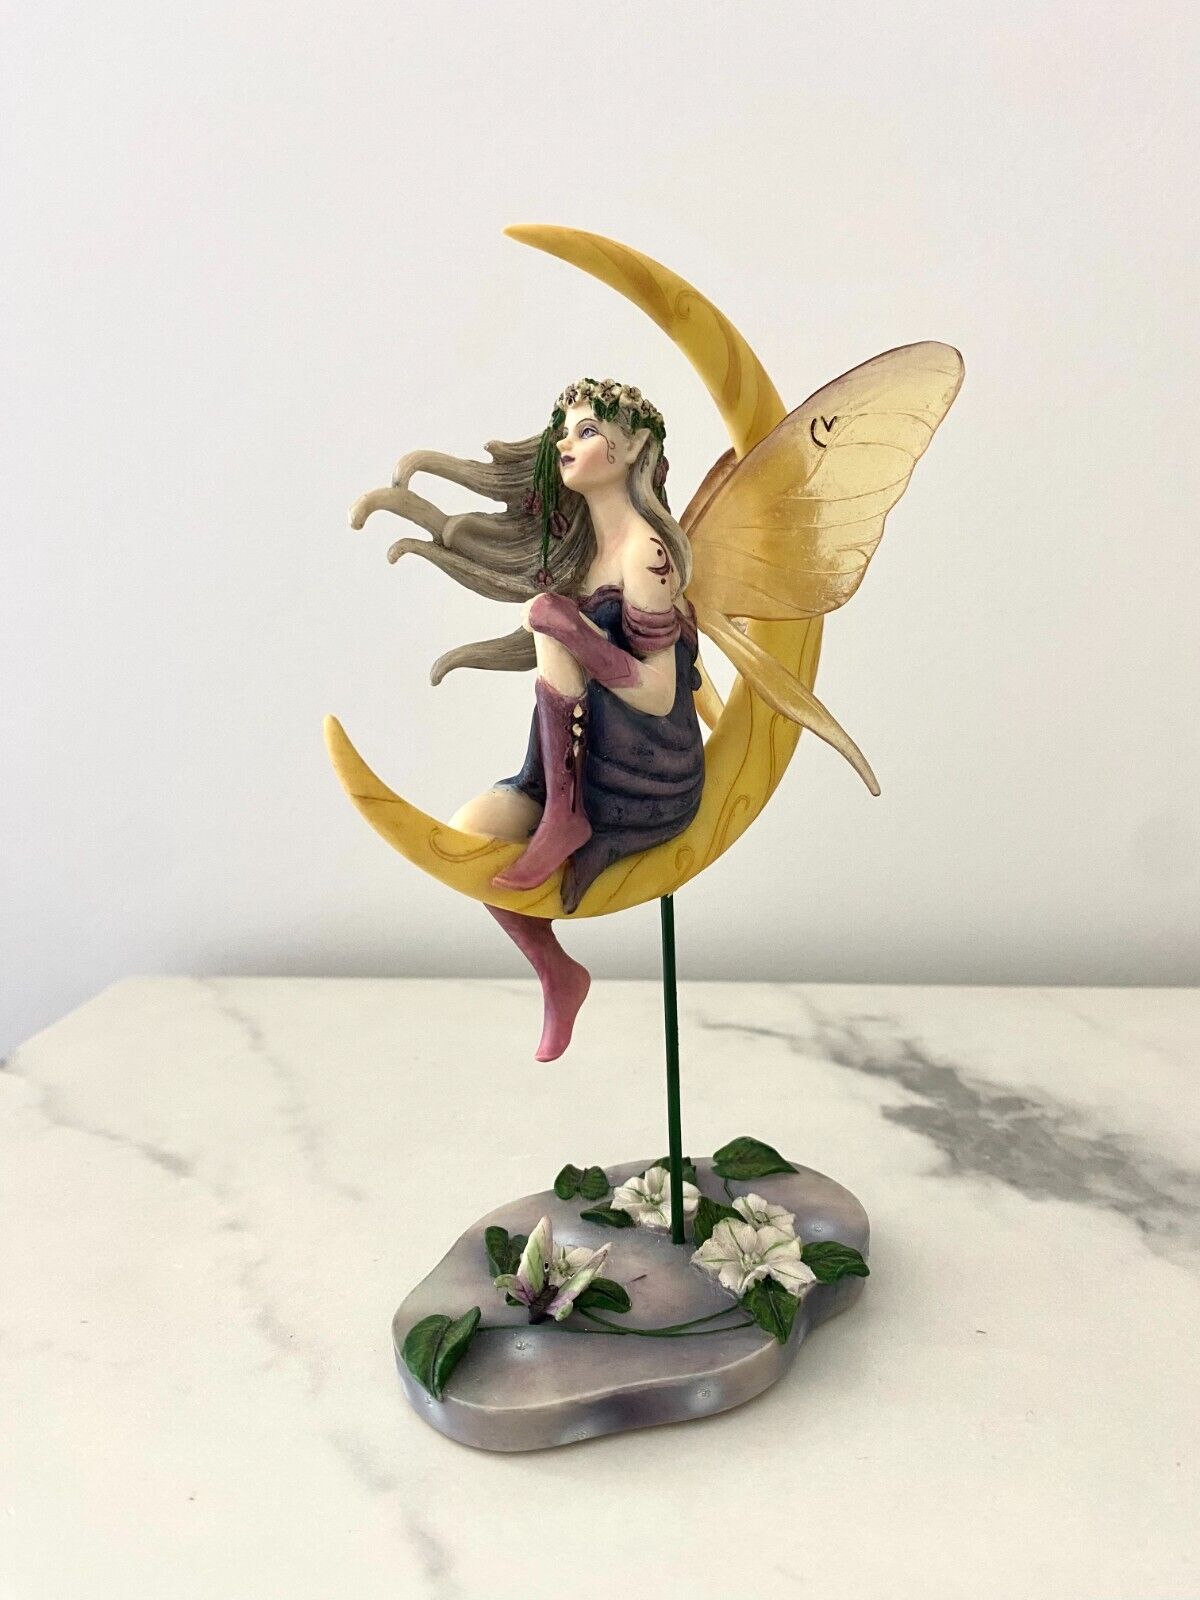 Jessica Galbreth Moon Flower Fairy Collectible Figurine - JG50143 with box